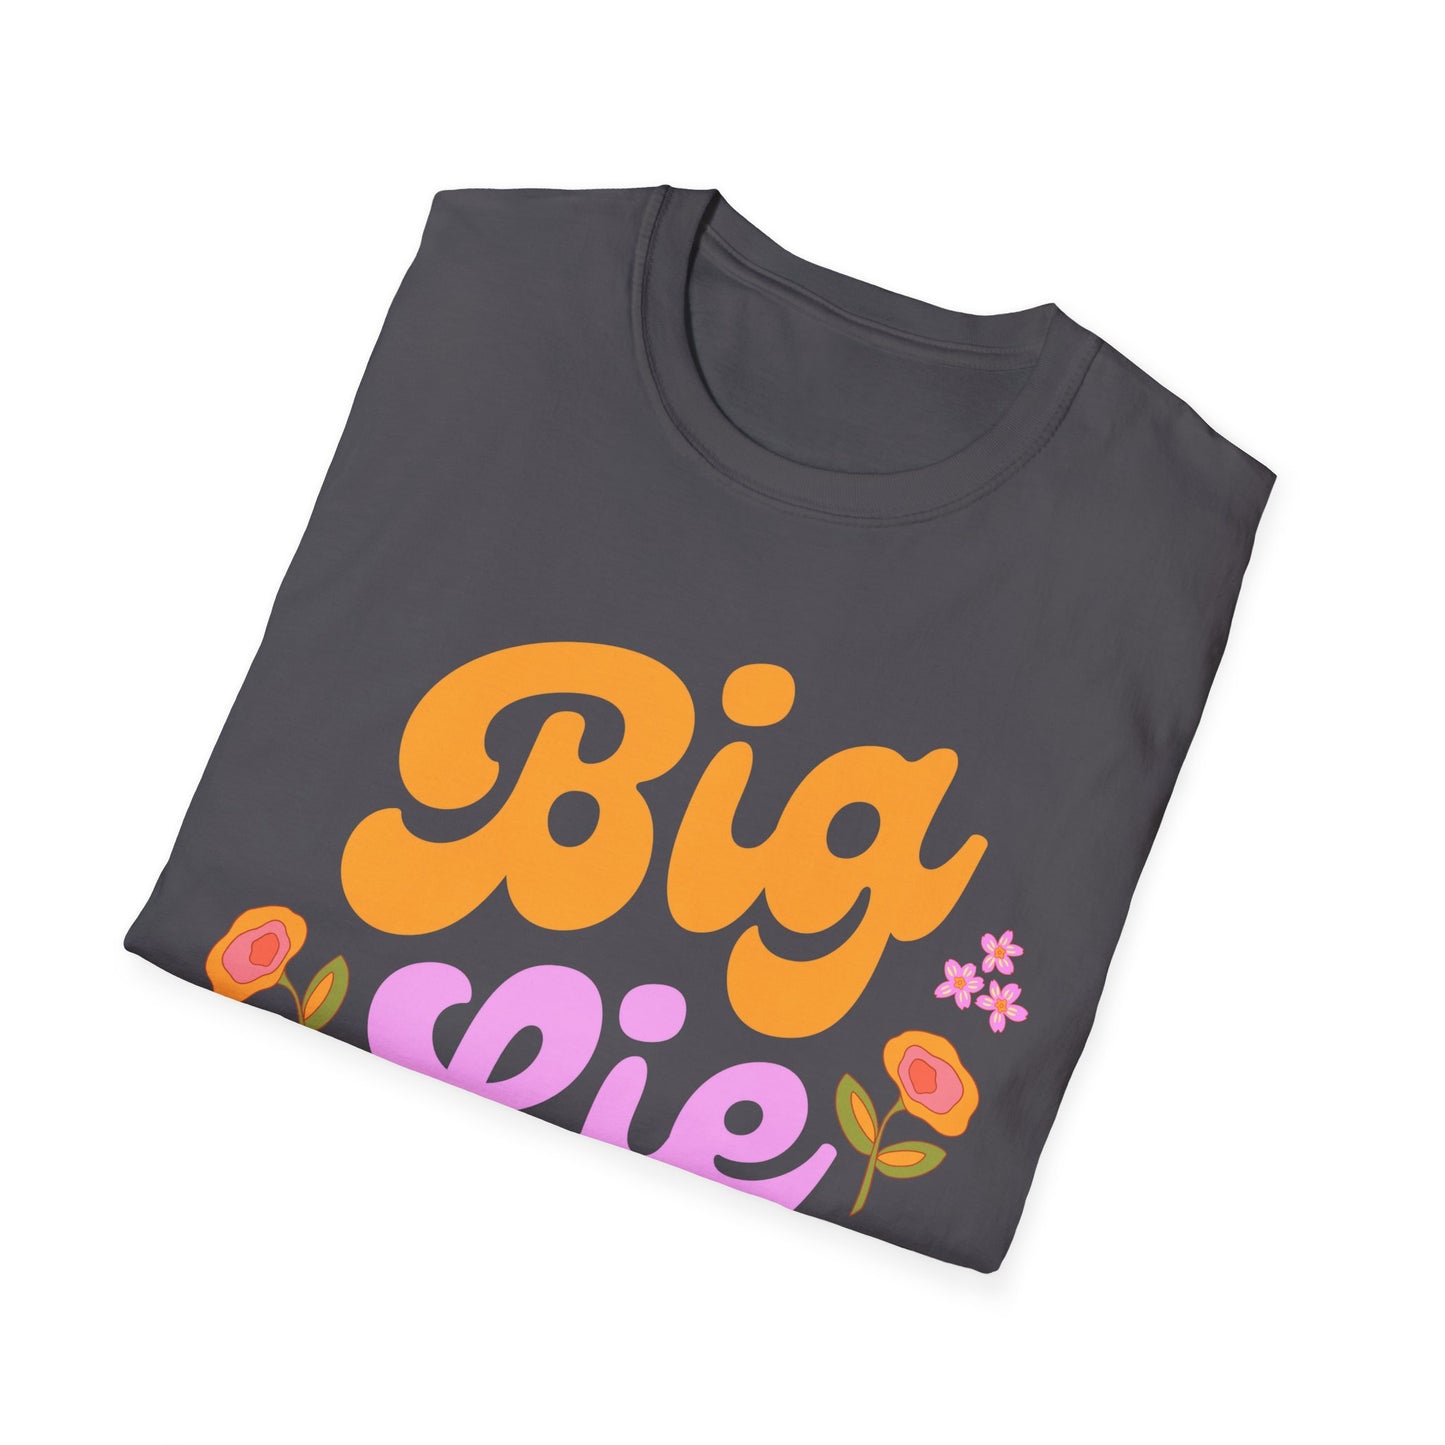 Big Lie! Bold Statement Soft Style t-shirt: You know and I know He did it! Don't let anyone forget it!